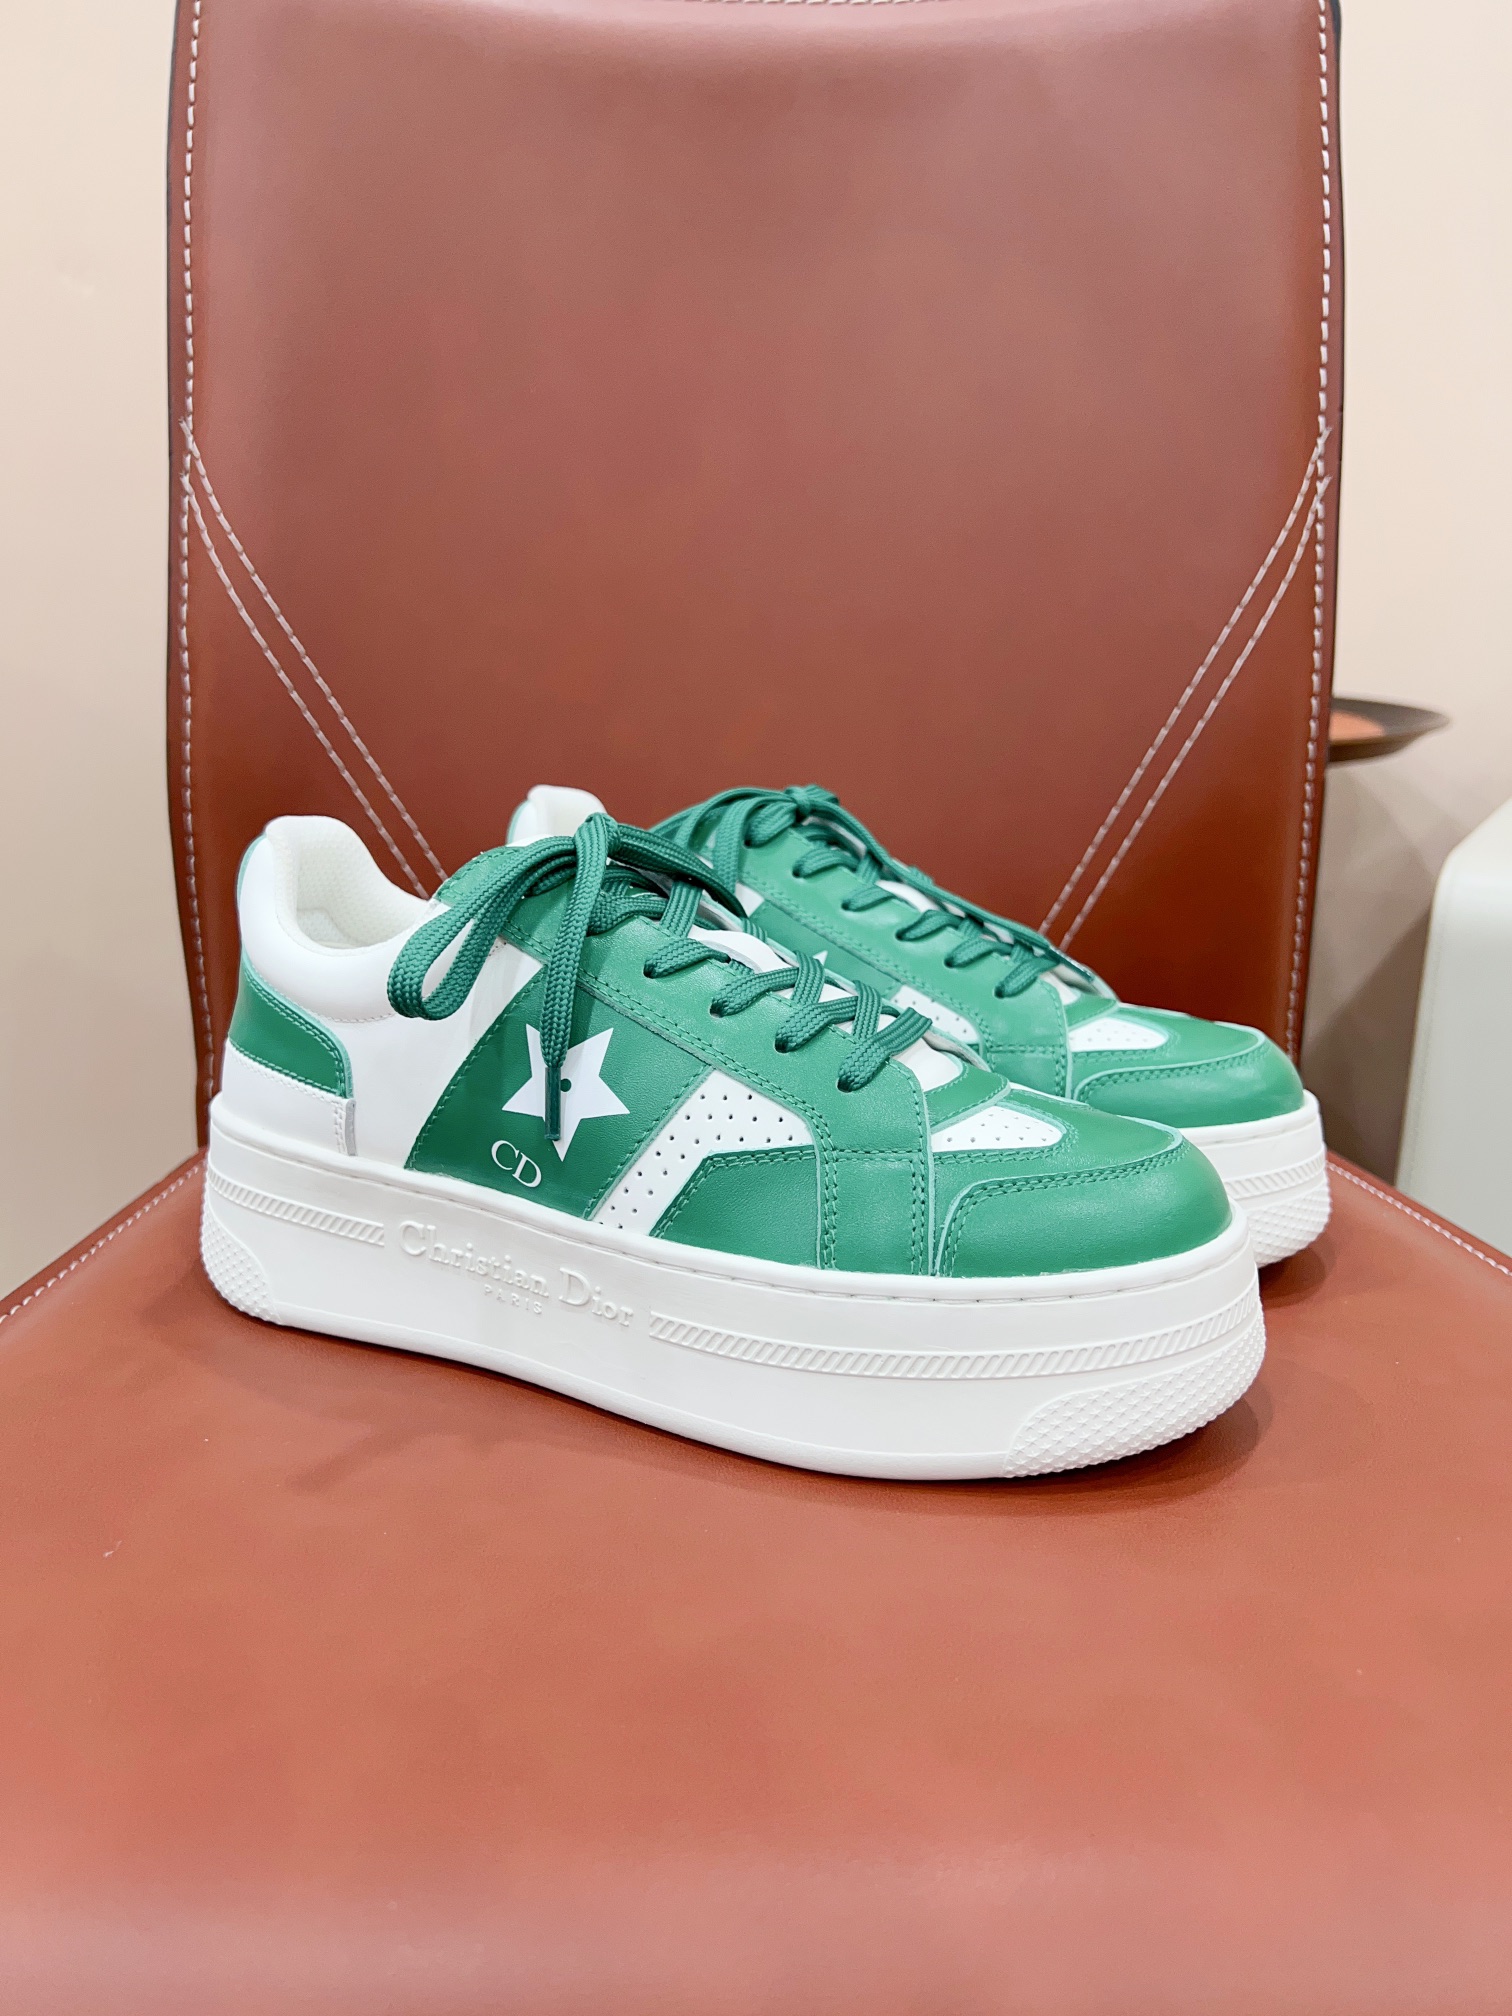 Dior Skateboard Shoes Sneakers Platform Shoes Practical And Versatile Replica Designer
 Green White Printing Calfskin Cowhide Rubber TPU Spring/Summer Collection Casual